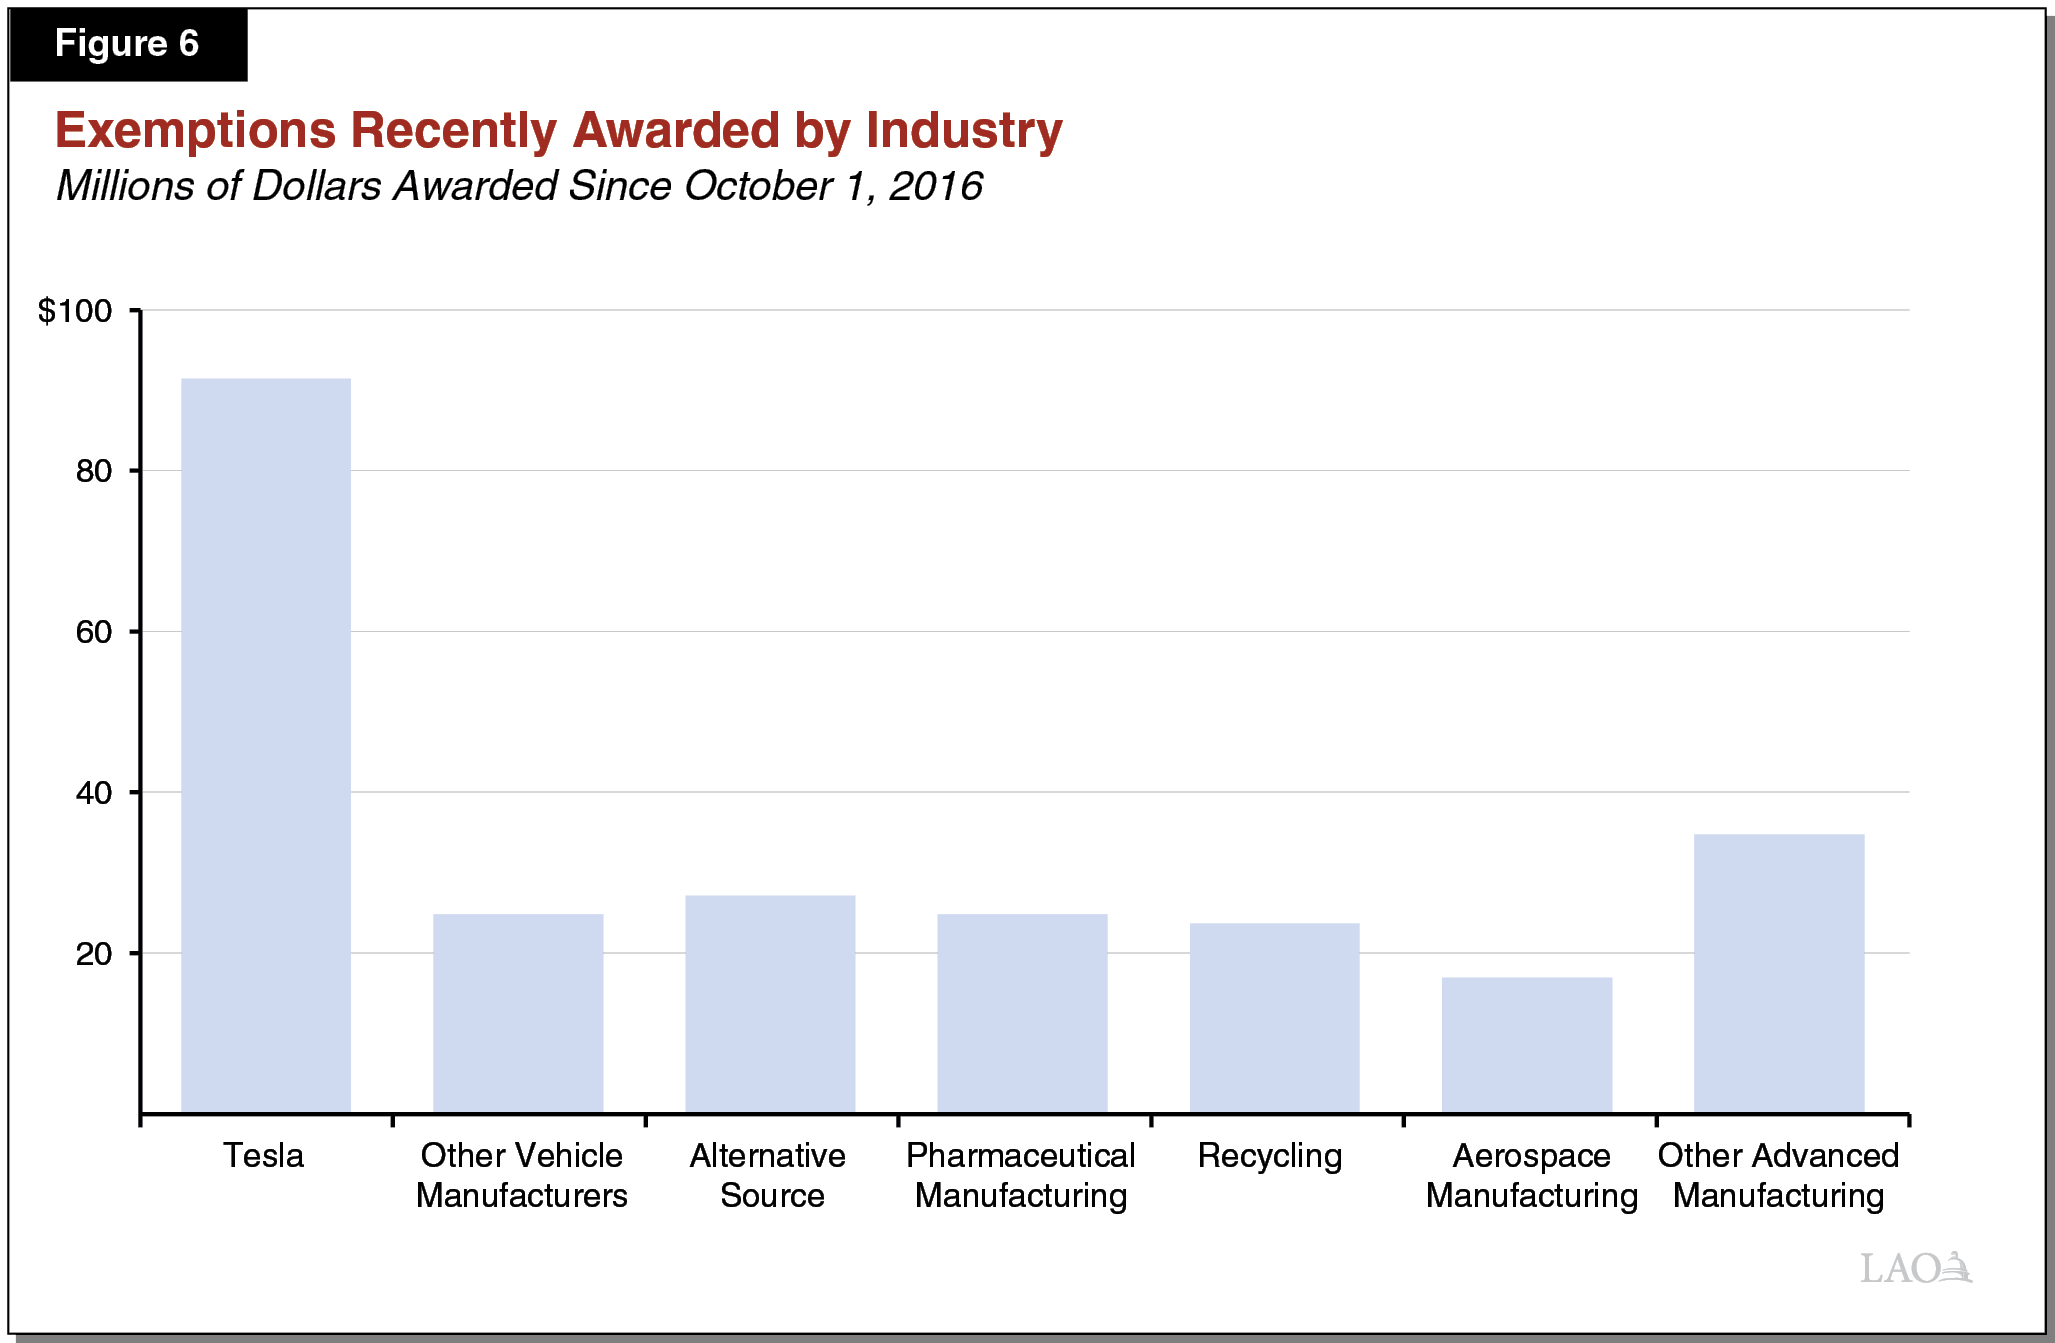 Figure 6 - Exemptions Awarded by Industry Since 2016